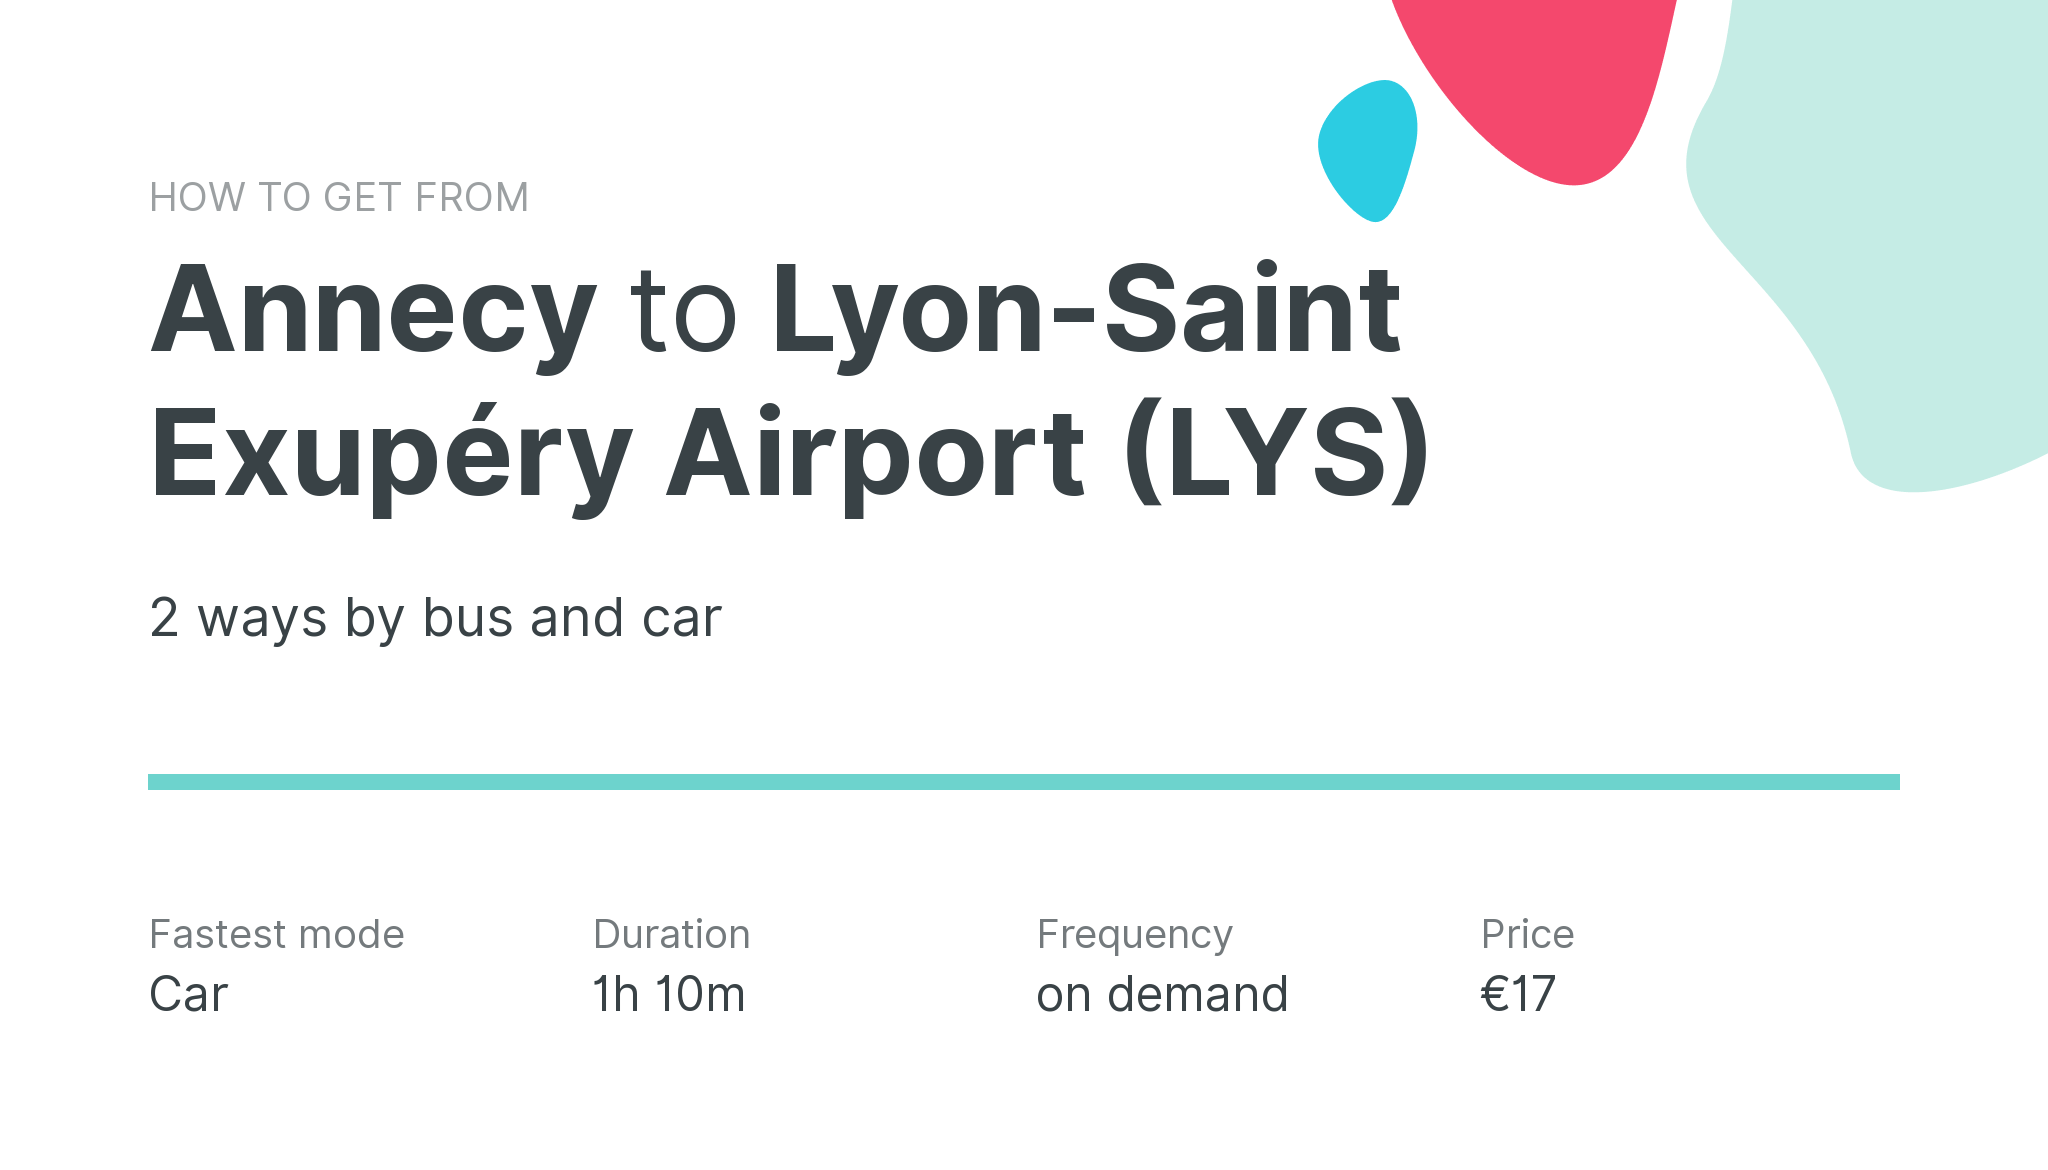 How do I get from Annecy to Lyon-Saint Exupéry Airport (LYS)